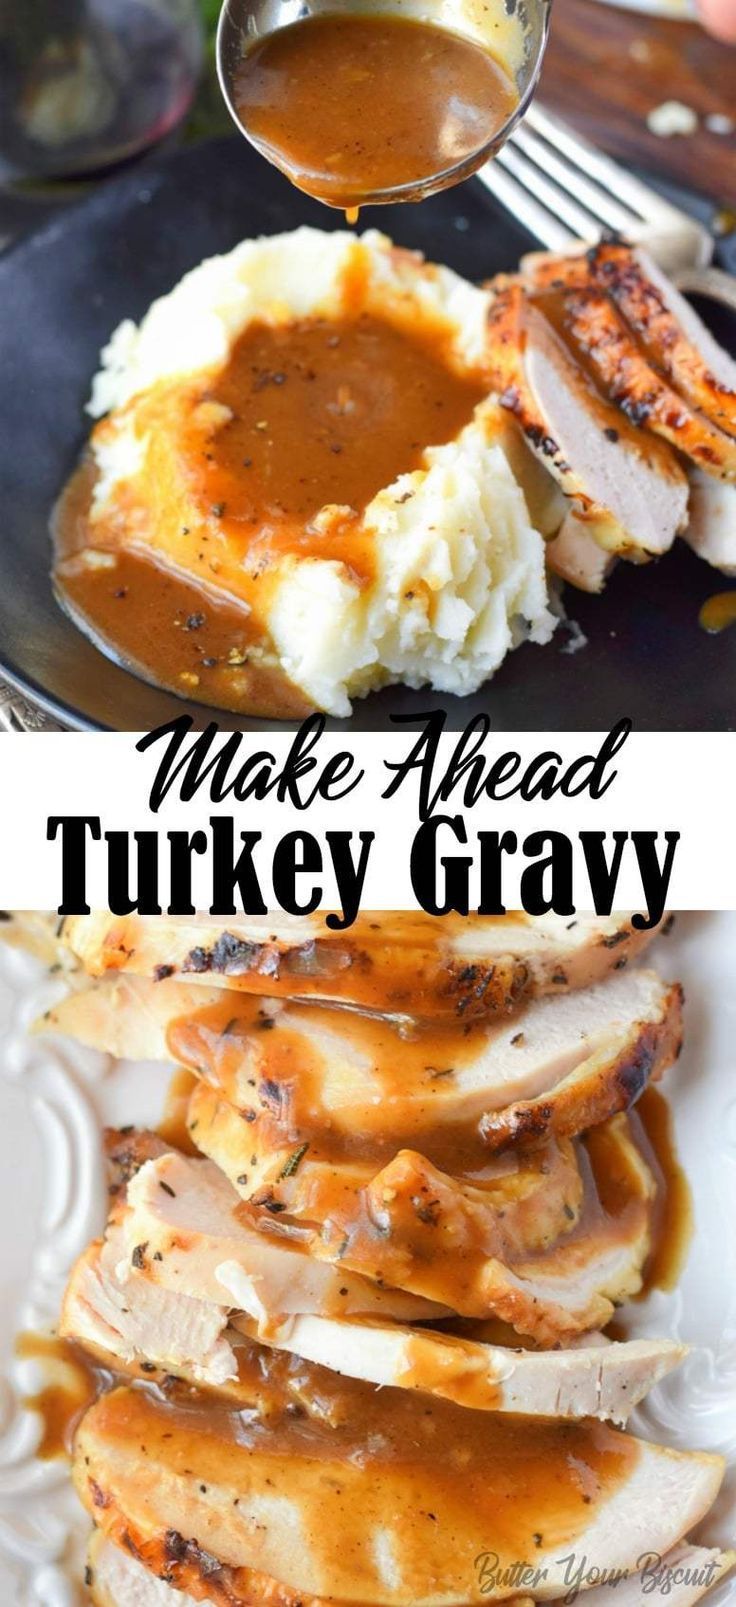 Make Ahead Turkey Gravy Recipe - Butter Your Biscuit -   19 make ahead sides for thanksgiving ideas